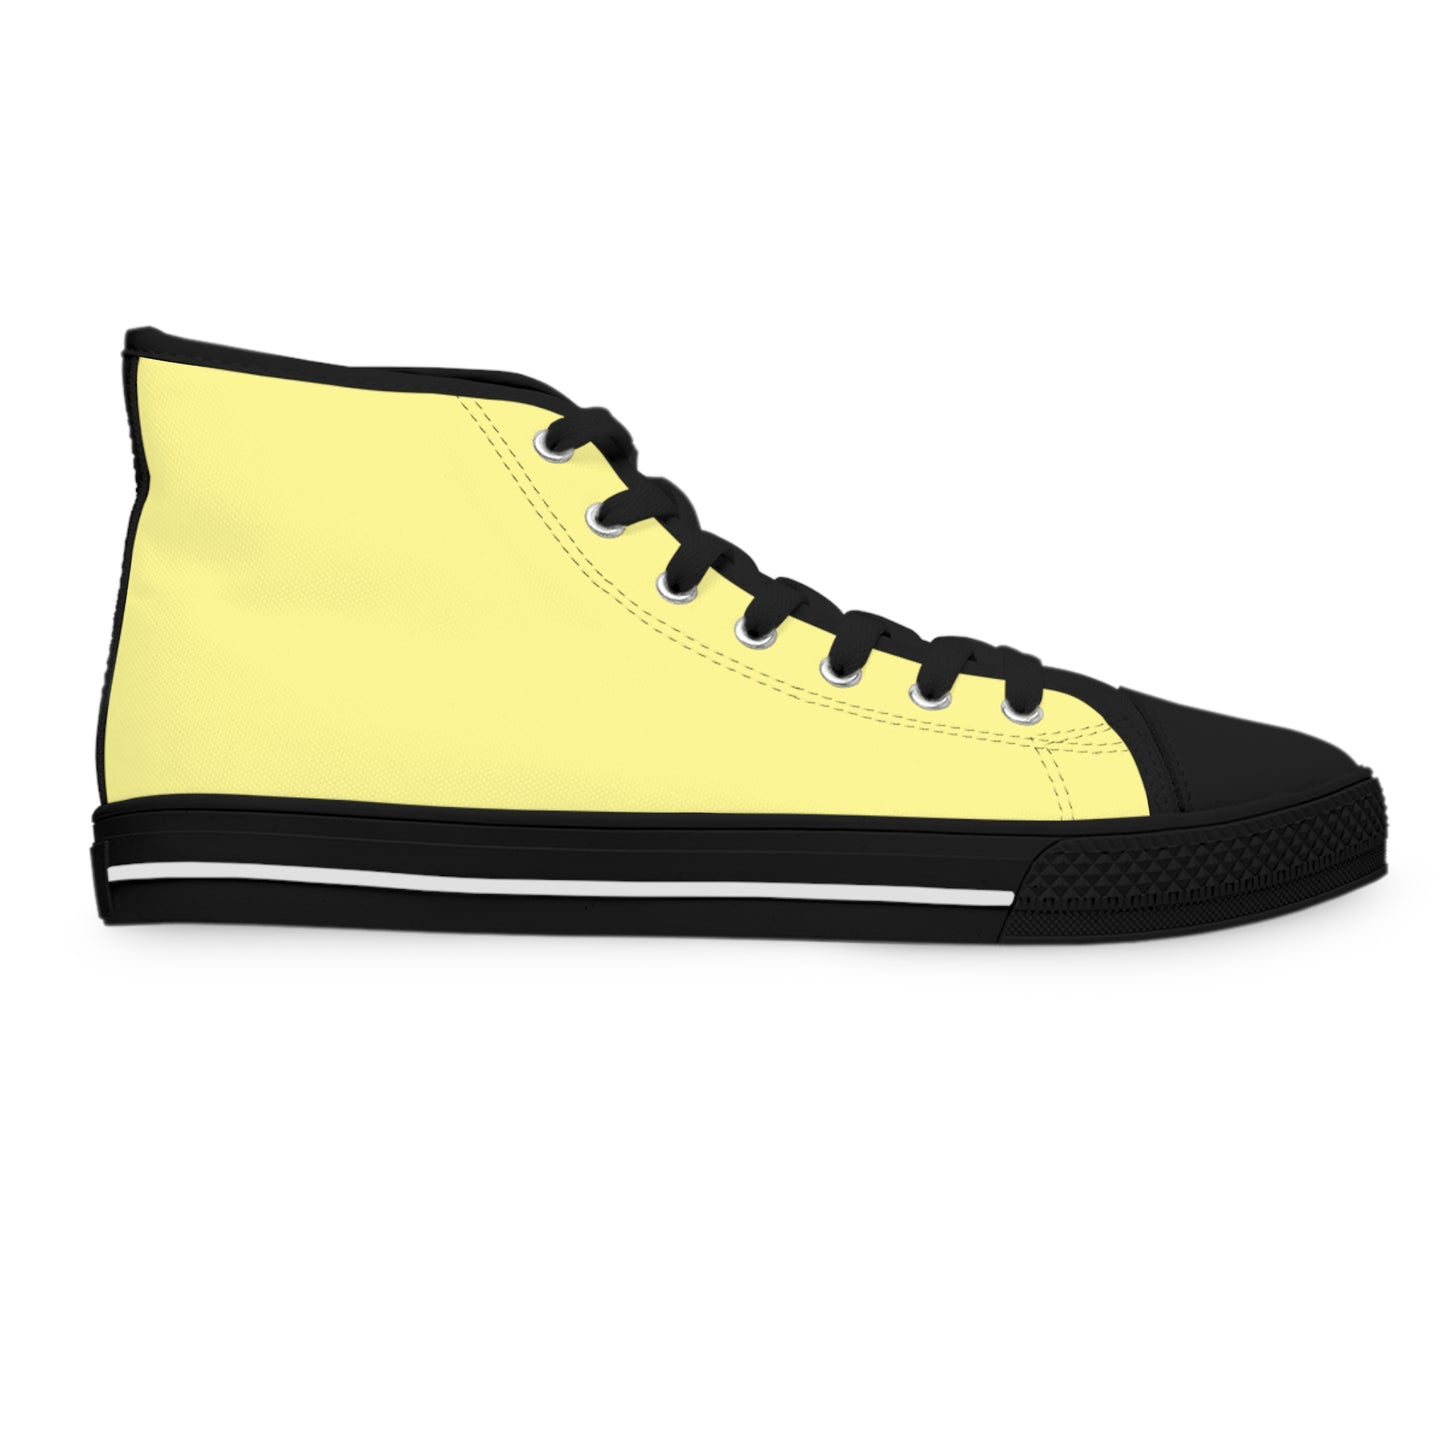 Women's Canvas High Top Solid Color Sneakers - Lemon Yellow US 12 White sole